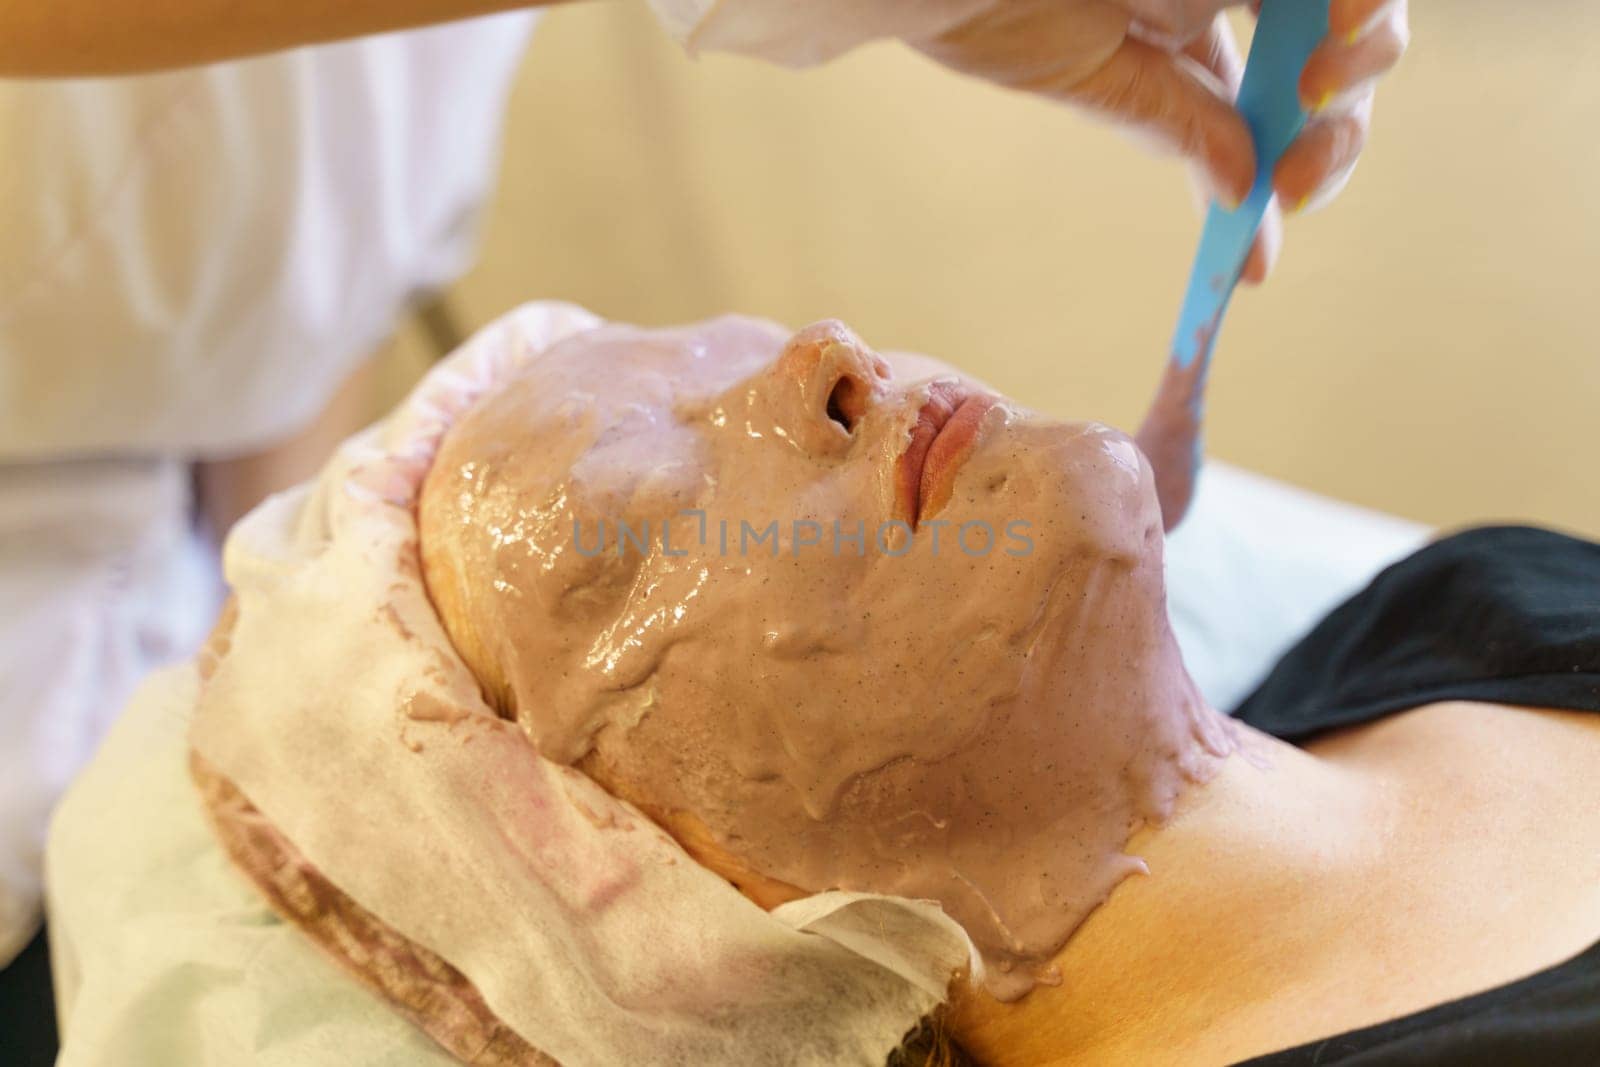 A woman is having a facial mask applied to her face in a beauty salon.